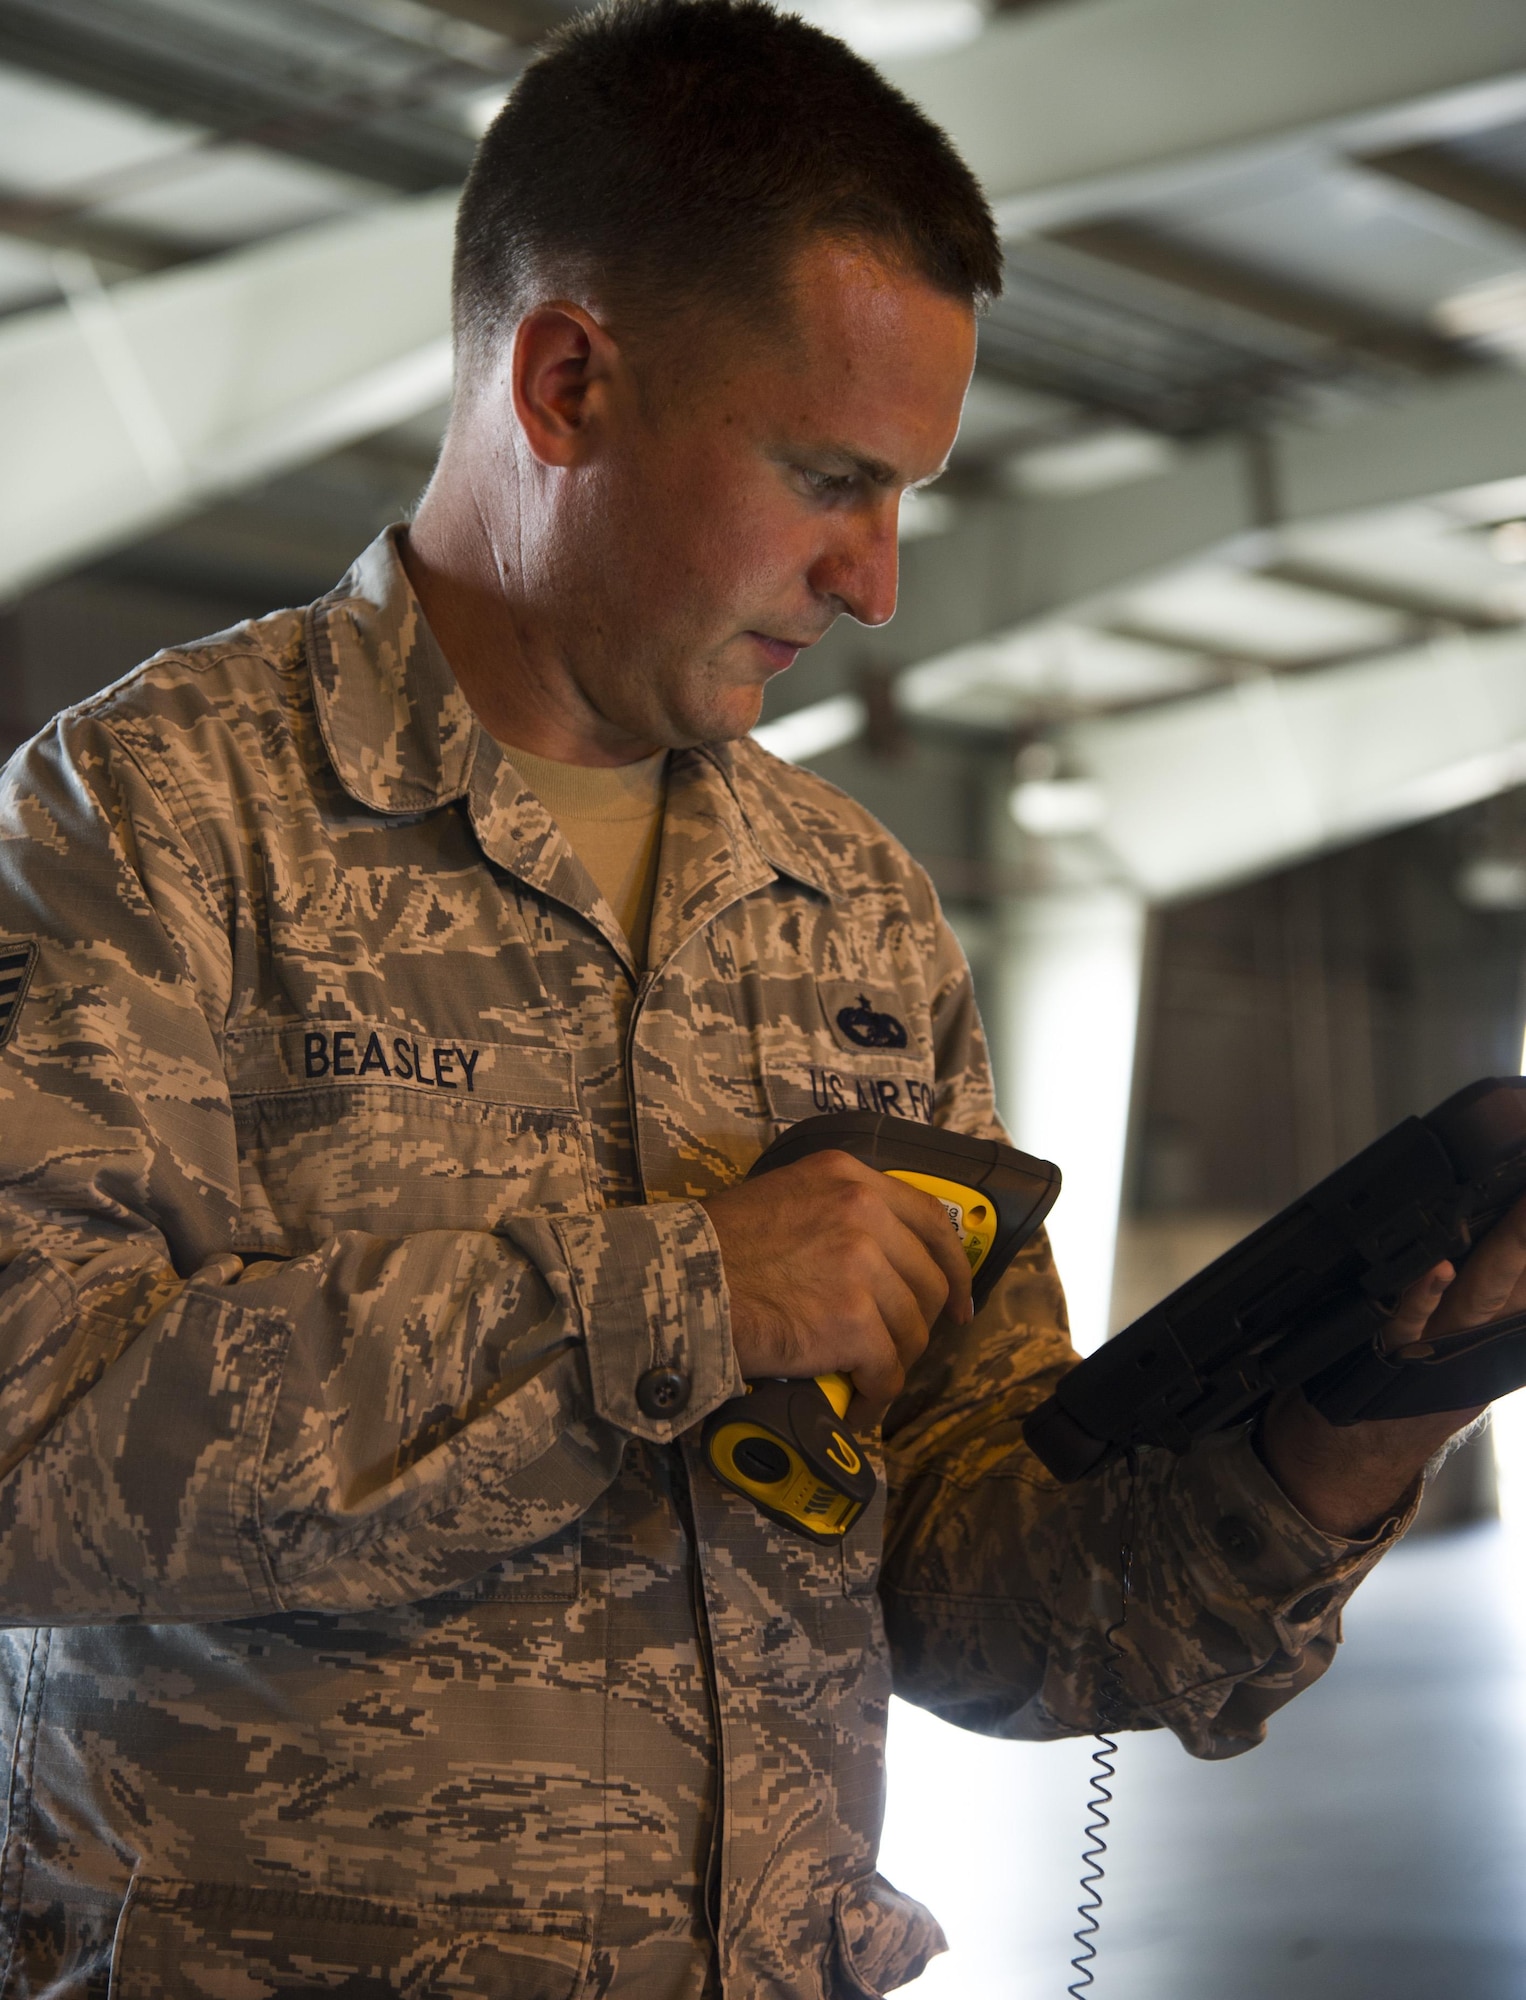 Staff Sgt. Philip Beasley, 735th Air Mobility Squadron assistant air freight shift supervisor, performs cargo inventory using a new digital program at Joint Base Pearl Harbor-Hickam, Hawaii, Aug. 24, 2017.